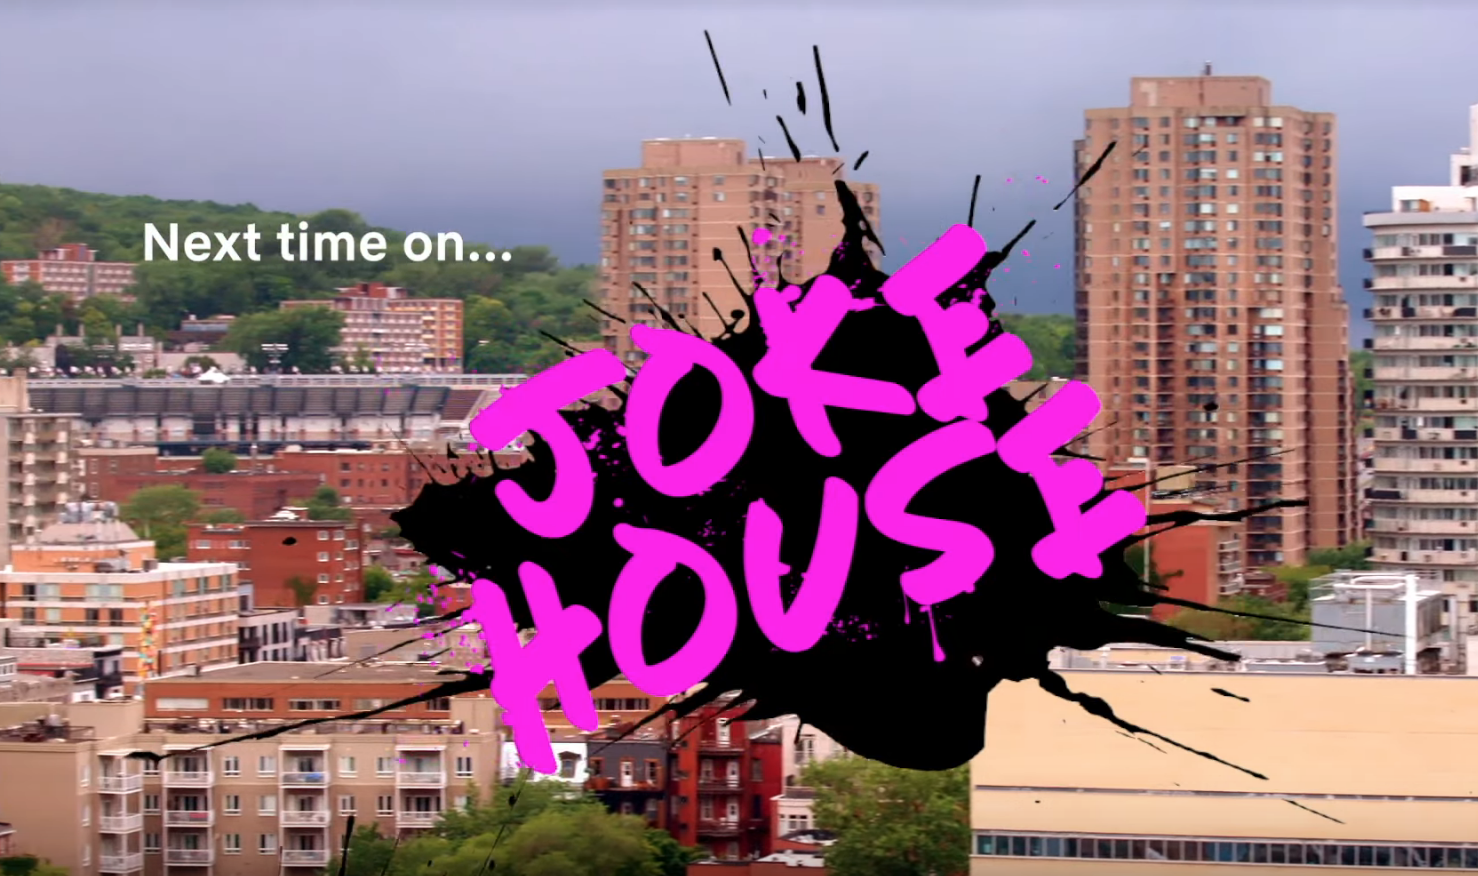 “Joke House” is the parody of “Last Comic Standing” you didn’t know you needed